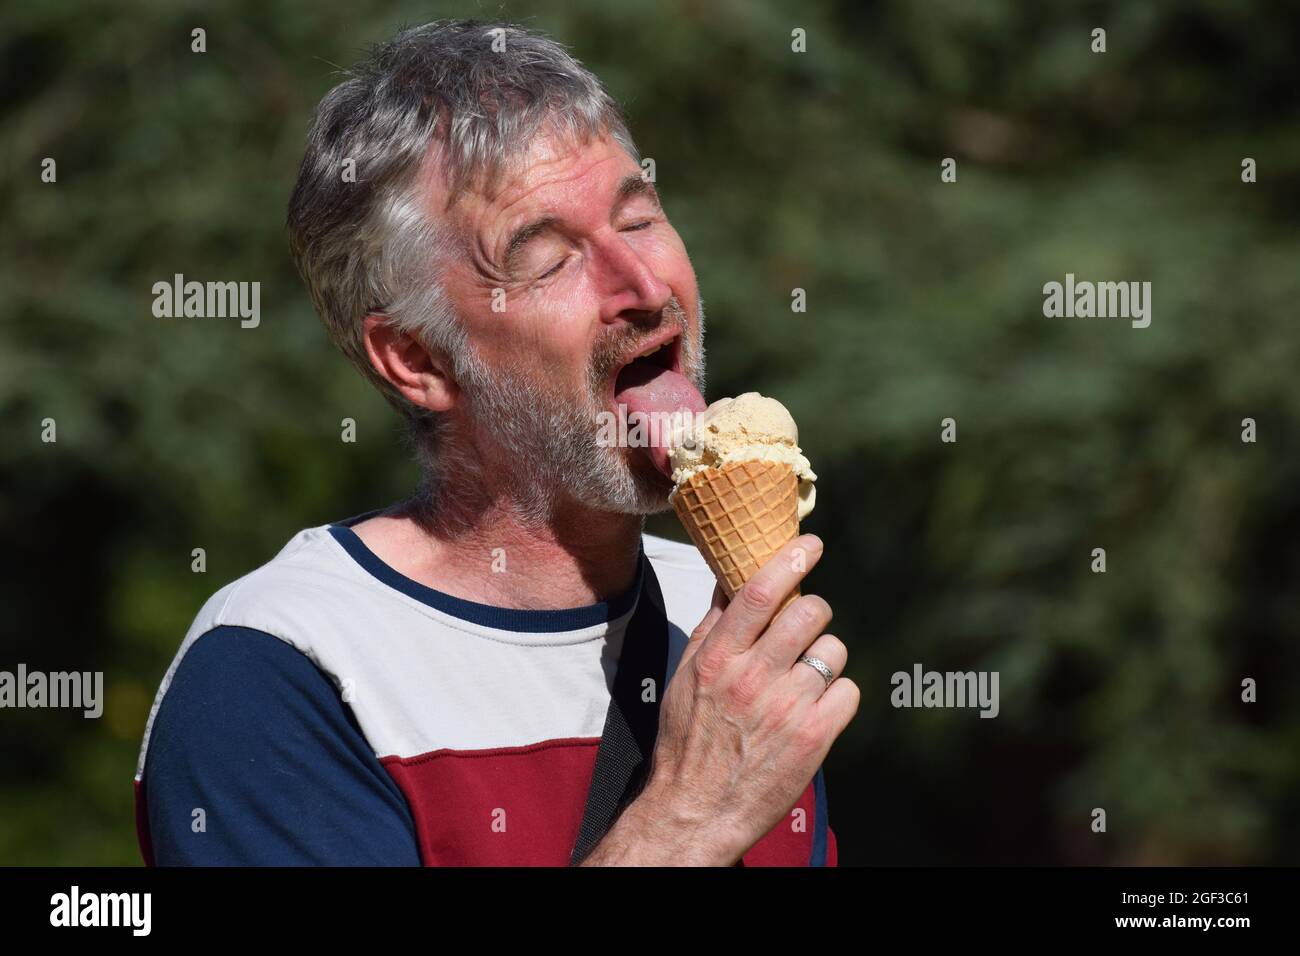 Middle aged British grey haired man in his fifties eating an ice cream cone Stock Photo